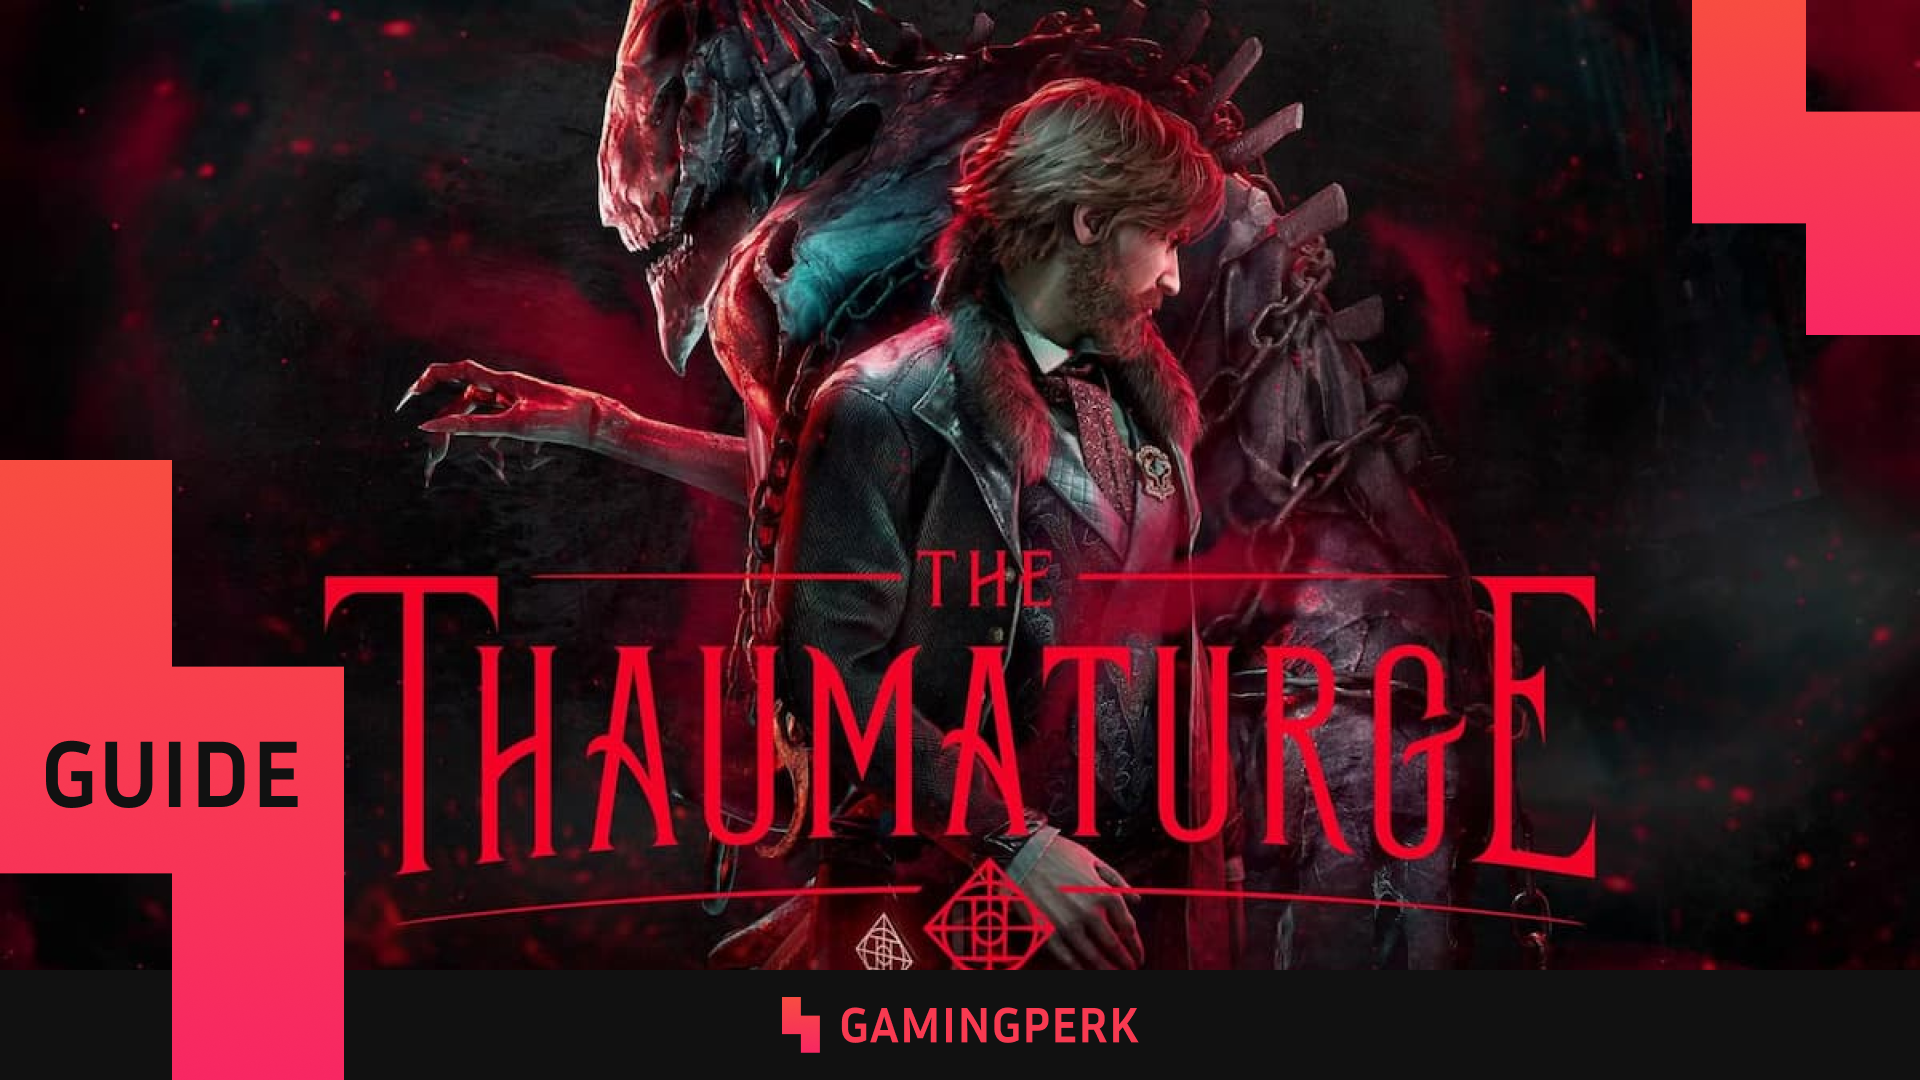 The Thaumaturge: useful tips for starting the game